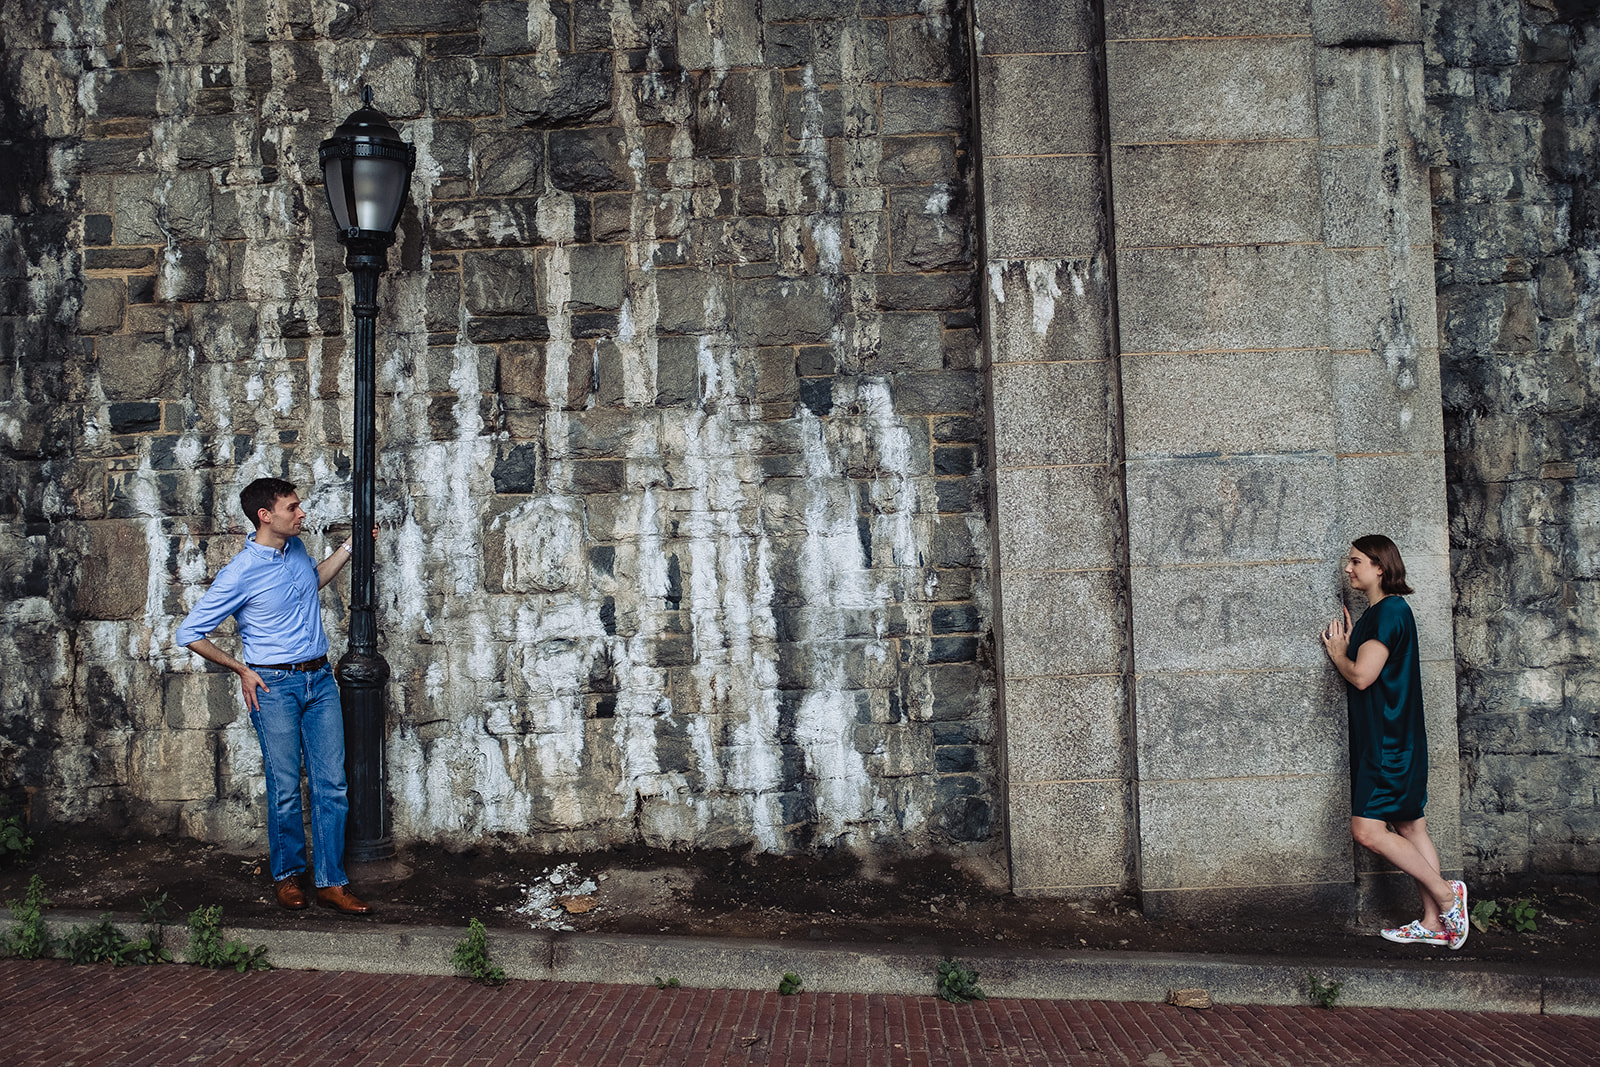 Engagement session at Fort Tryon Park in NYC